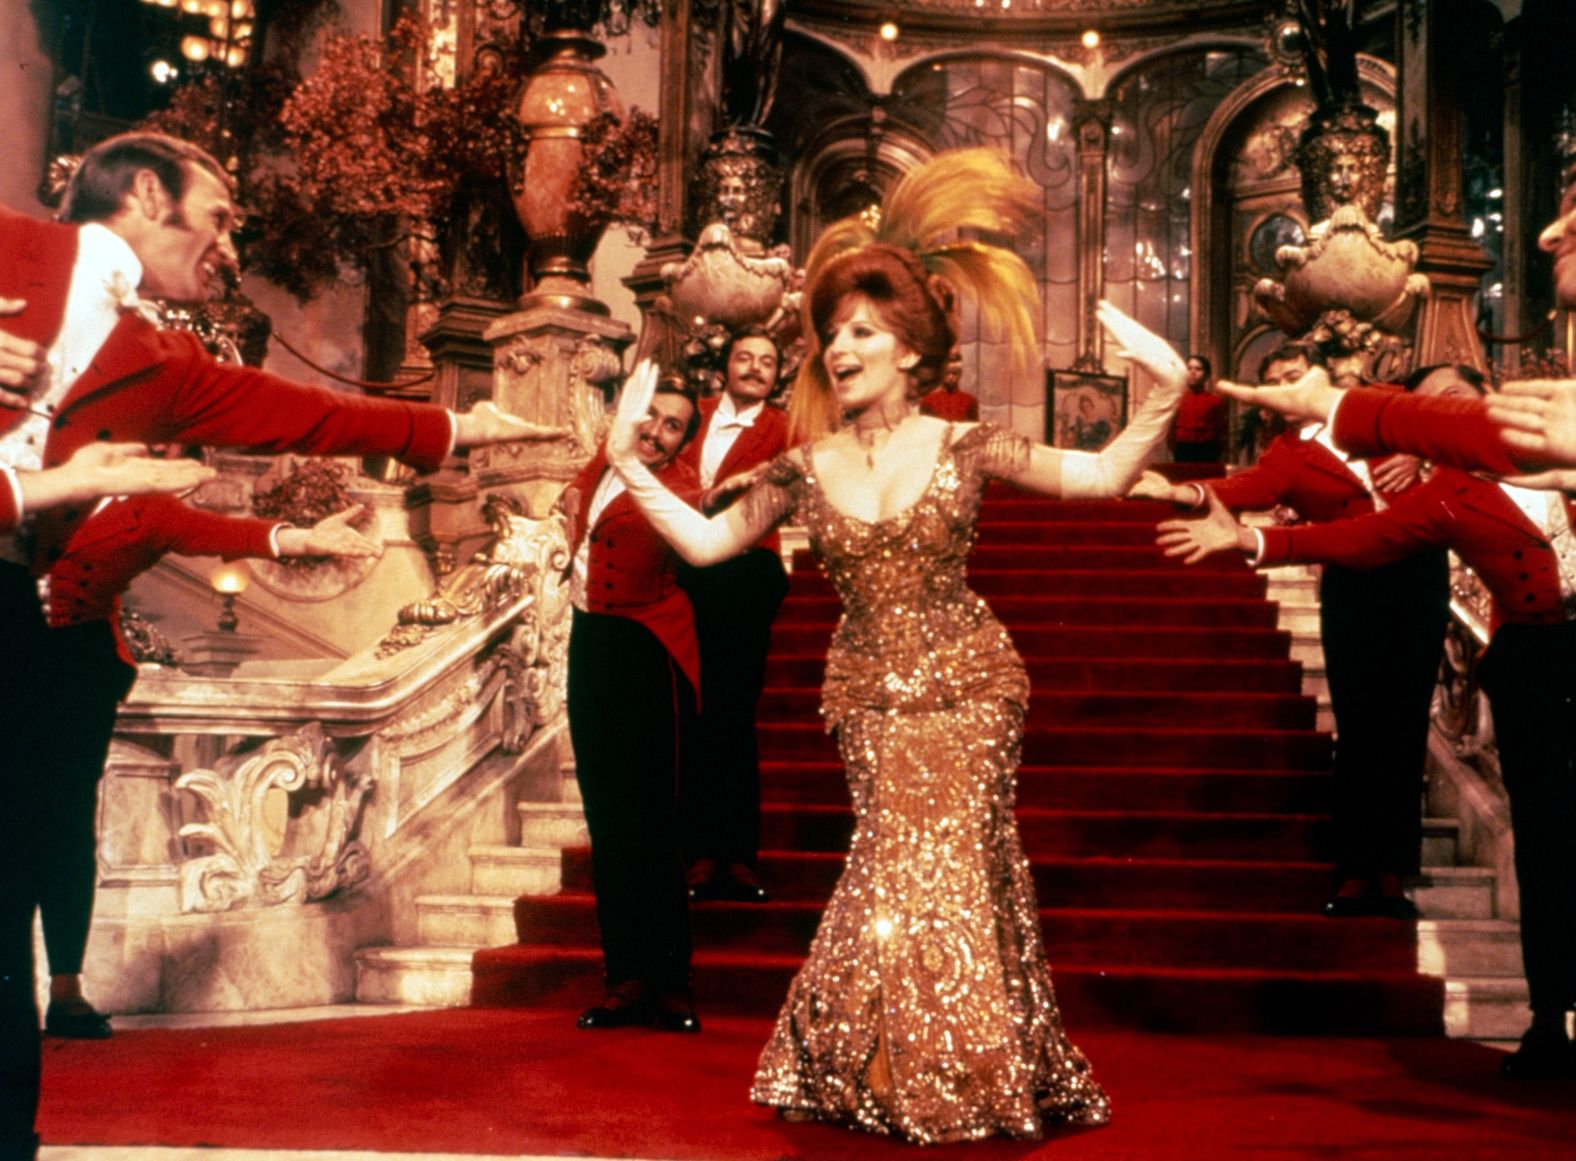 Streisand appears in the 1969 movie-musical "Hello Dolly!"